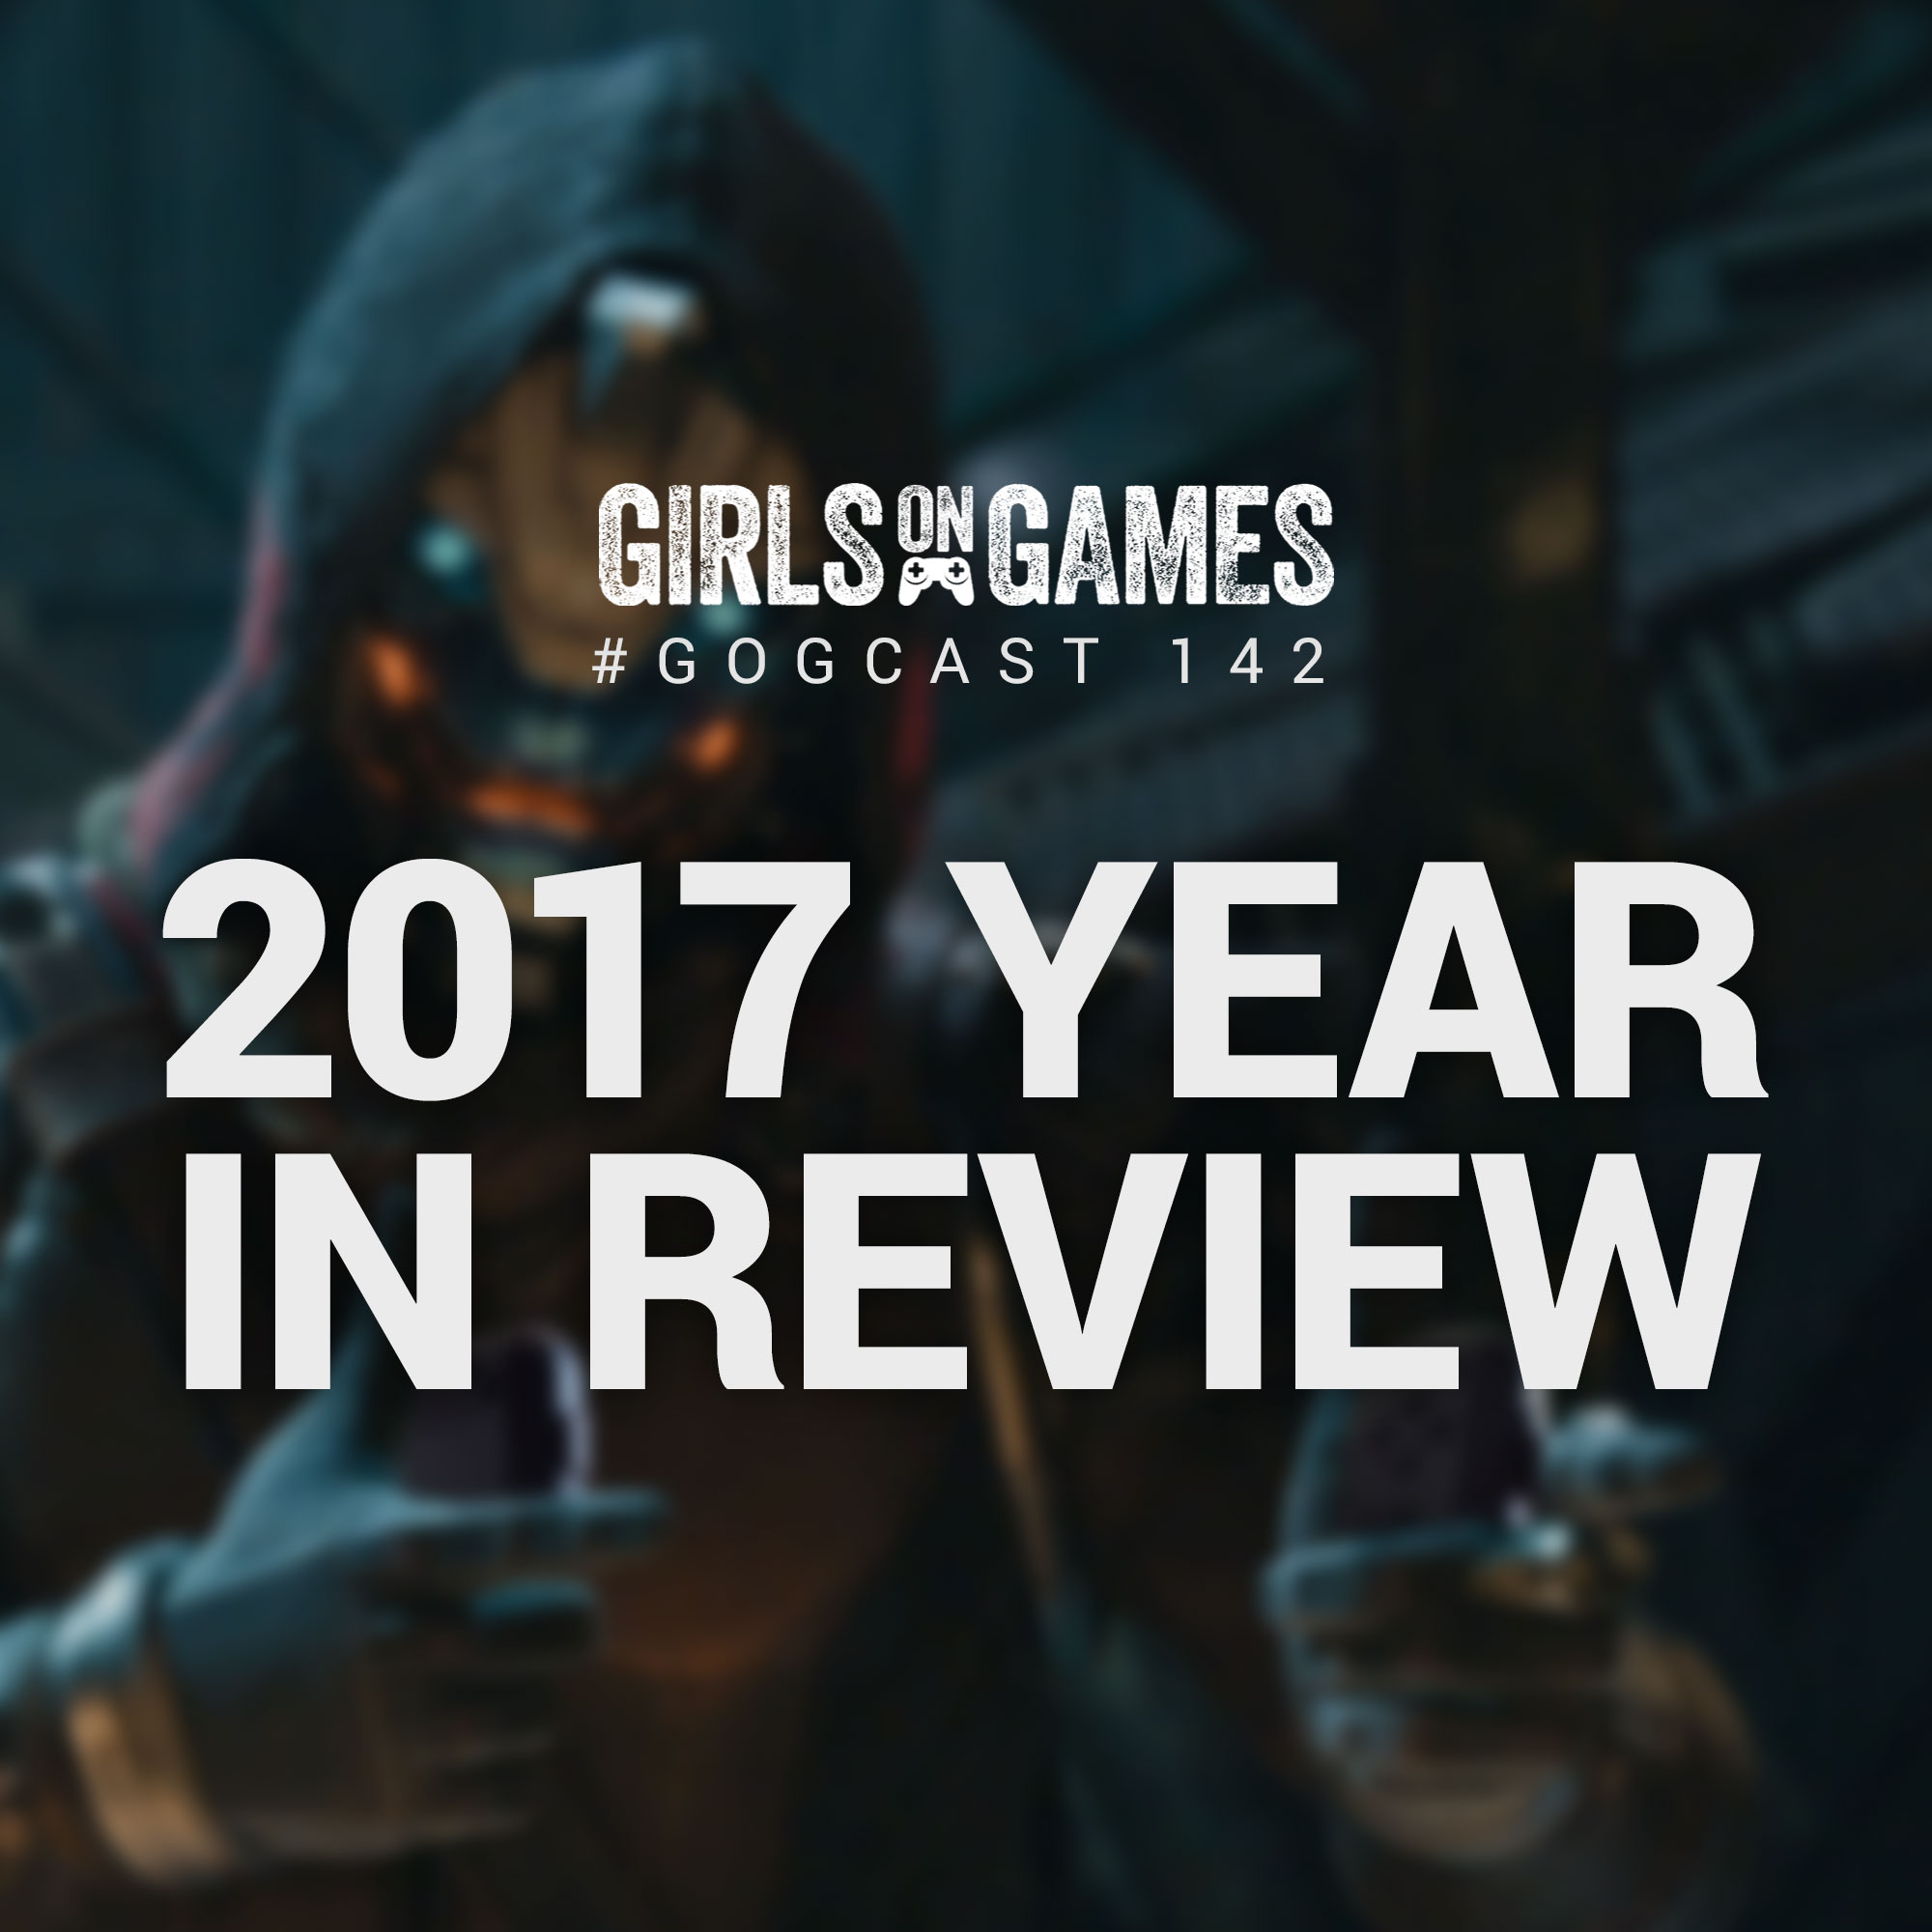 GoGCast 142: 2017 Year in Review